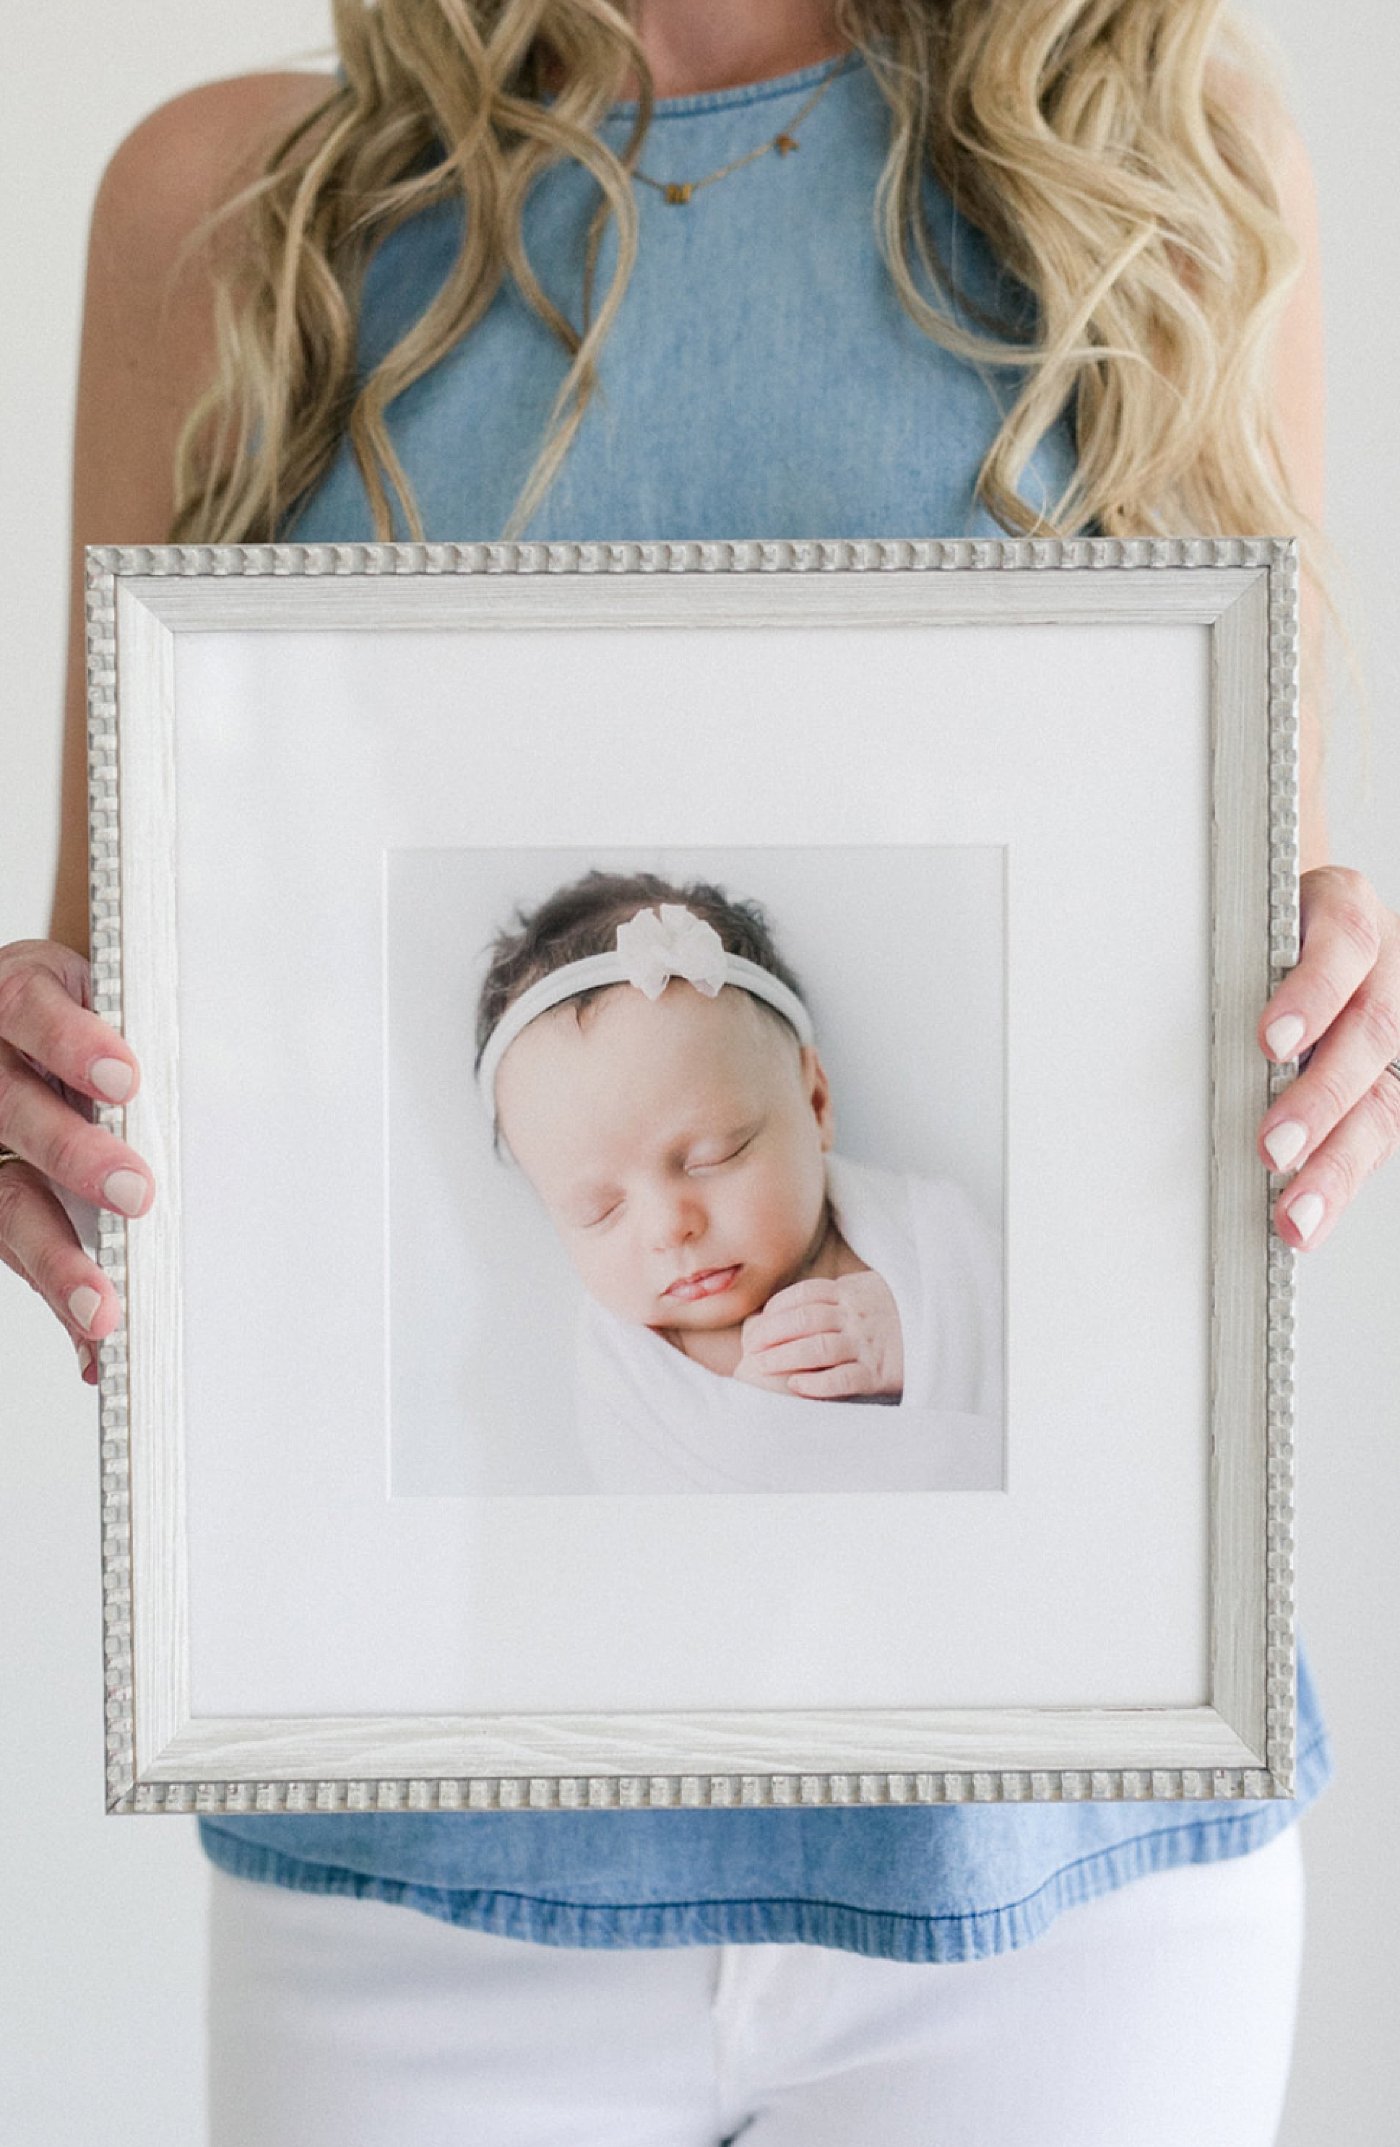 Custom Framed Family Portraits For Displaying In Home | Ambre Williams Photography